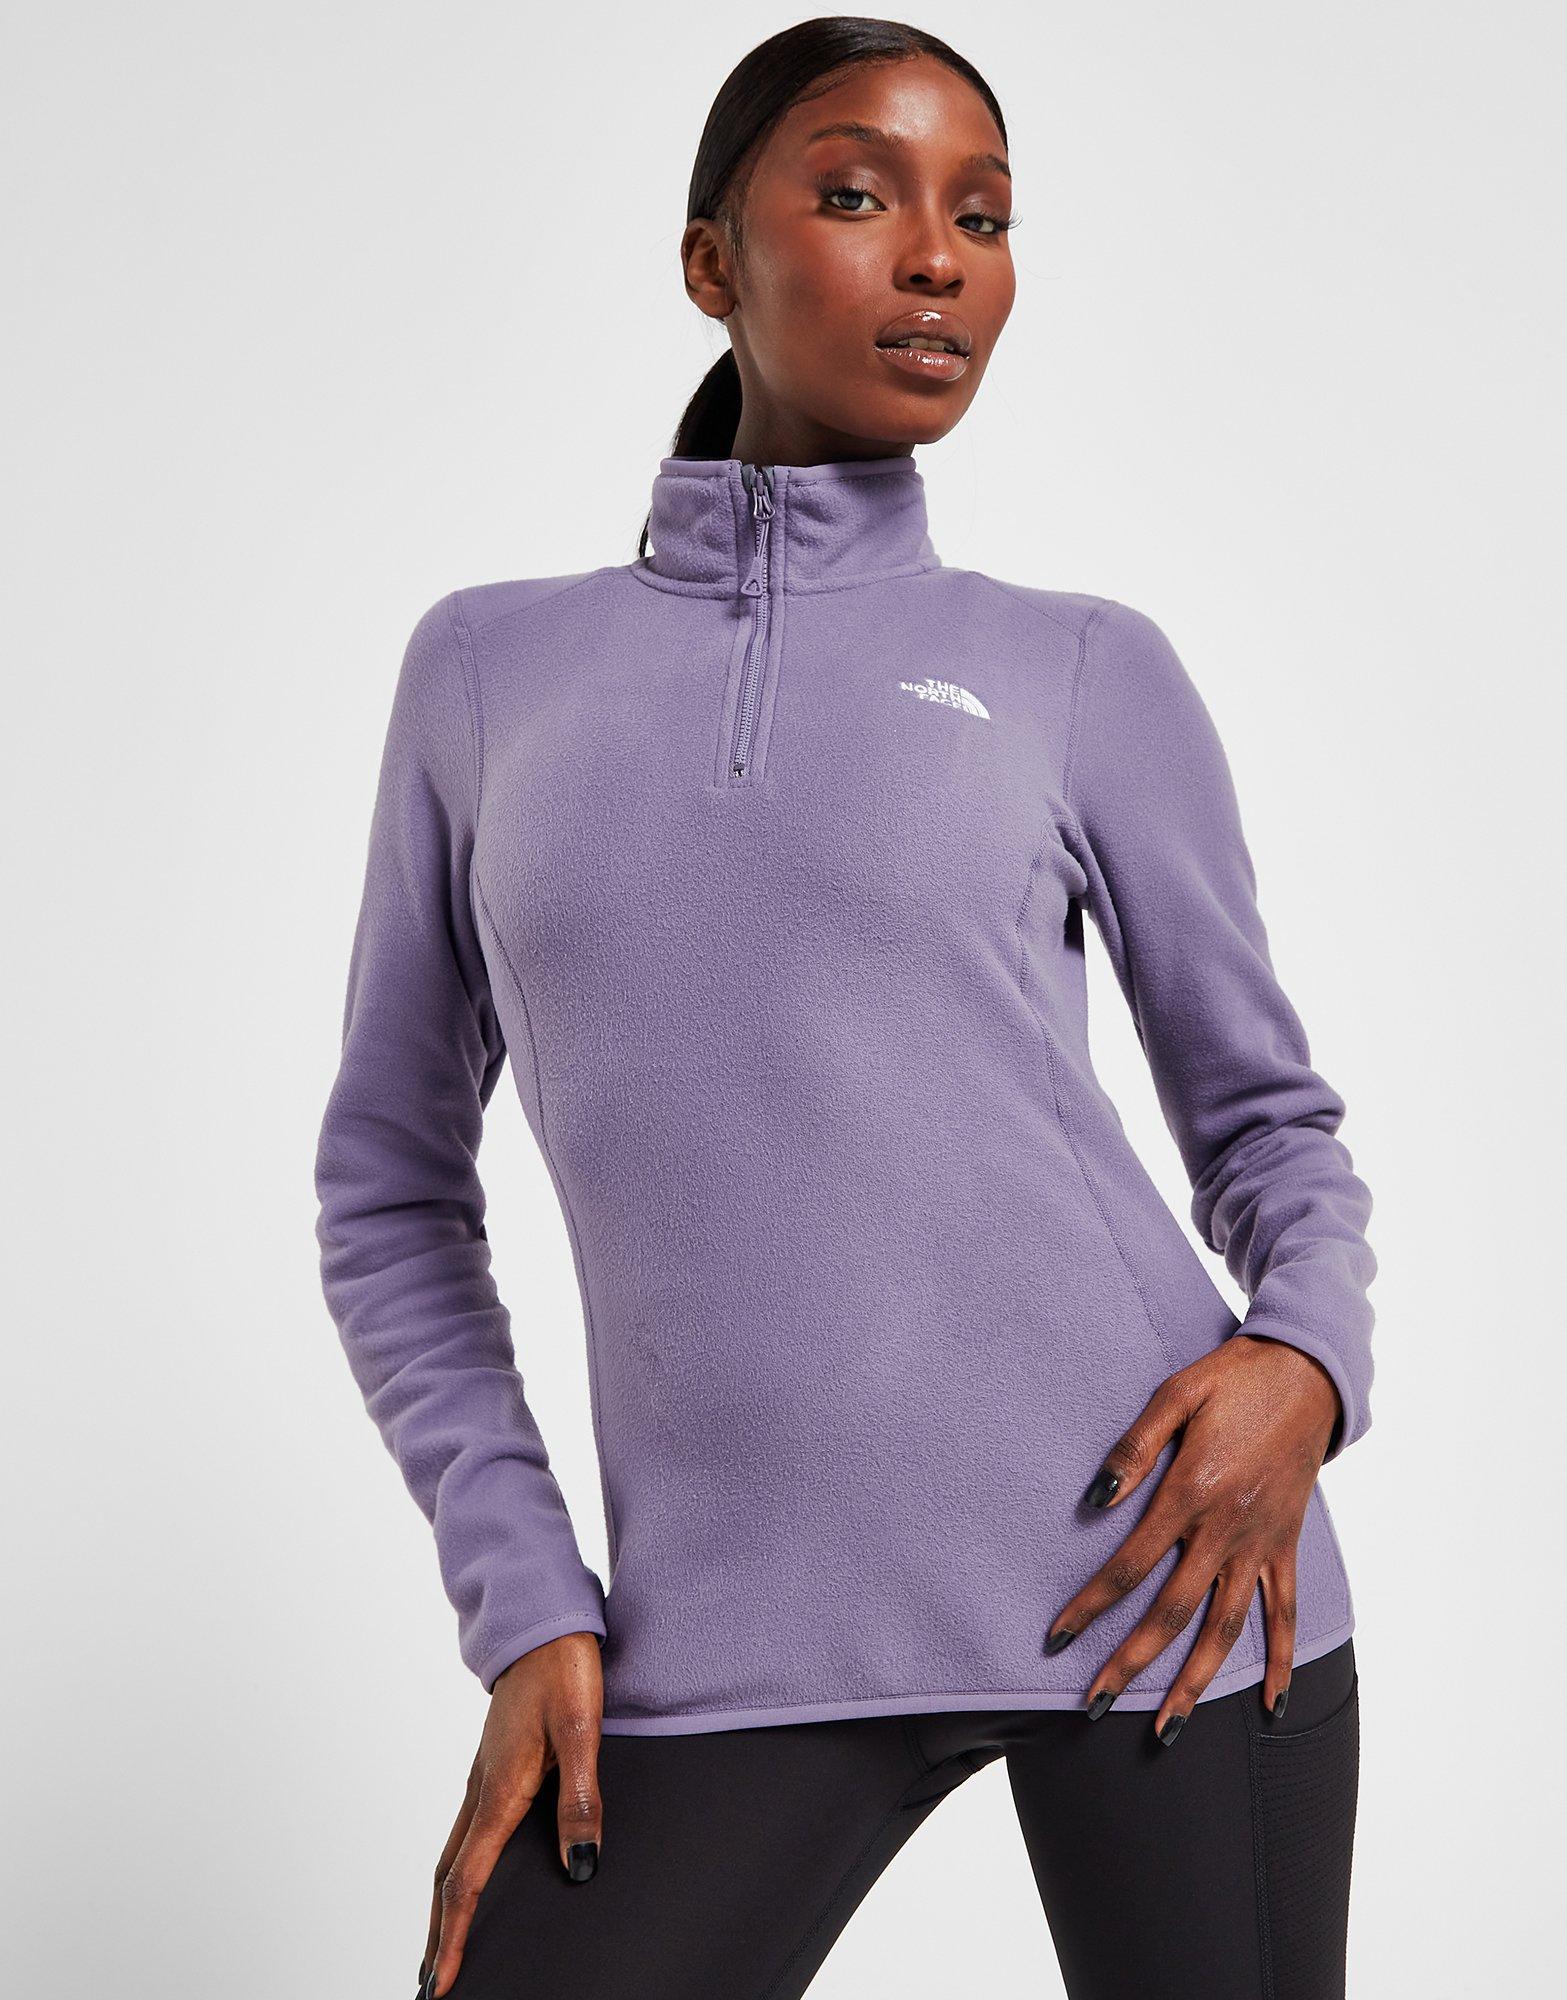 Purple The North Face Glacier 1/4 Zip Top JD Sports Global, 52% OFF